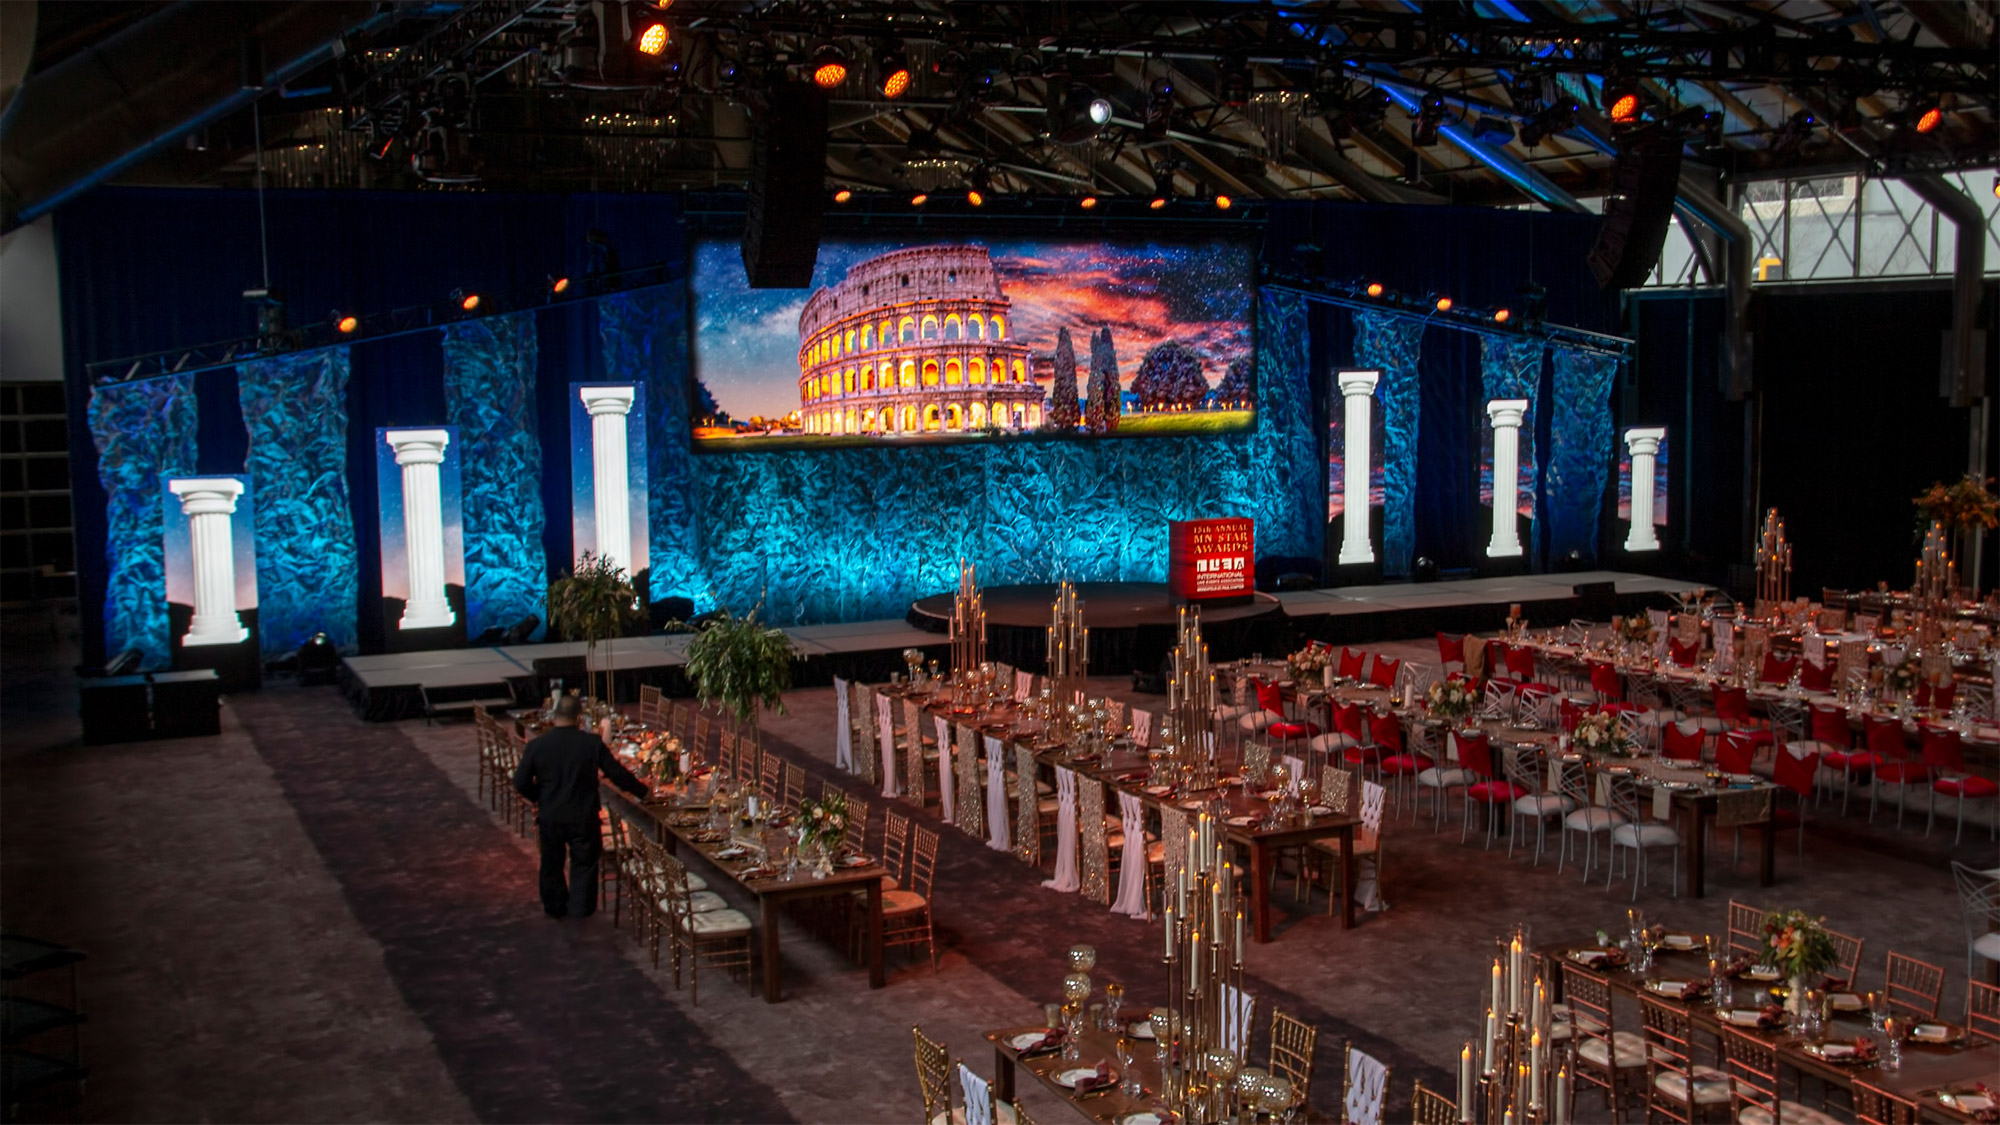 Ask the Pros: 7 Event Lighting and Sound Tips to Make Your Event Special